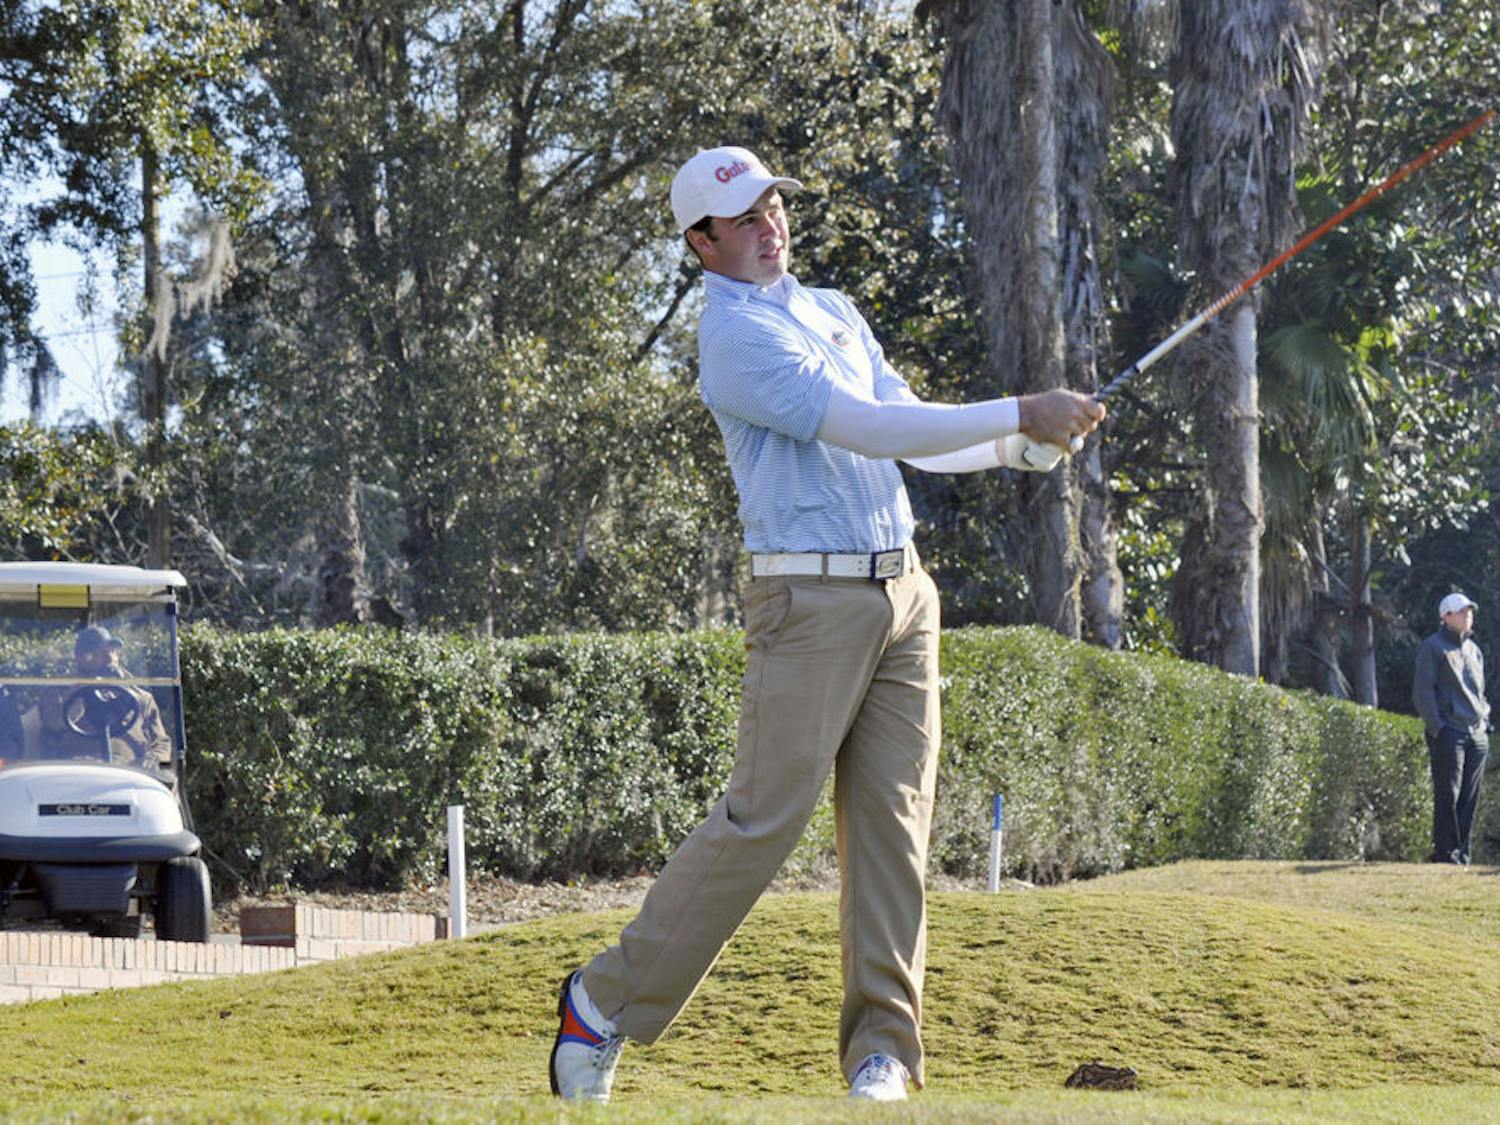 UF's A.J. Crouch follows through on his backswing at the 2015 SunTrust Gator Invitational on Feb. 14, 2015 at the Mark Bostick Golf Course.&nbsp;